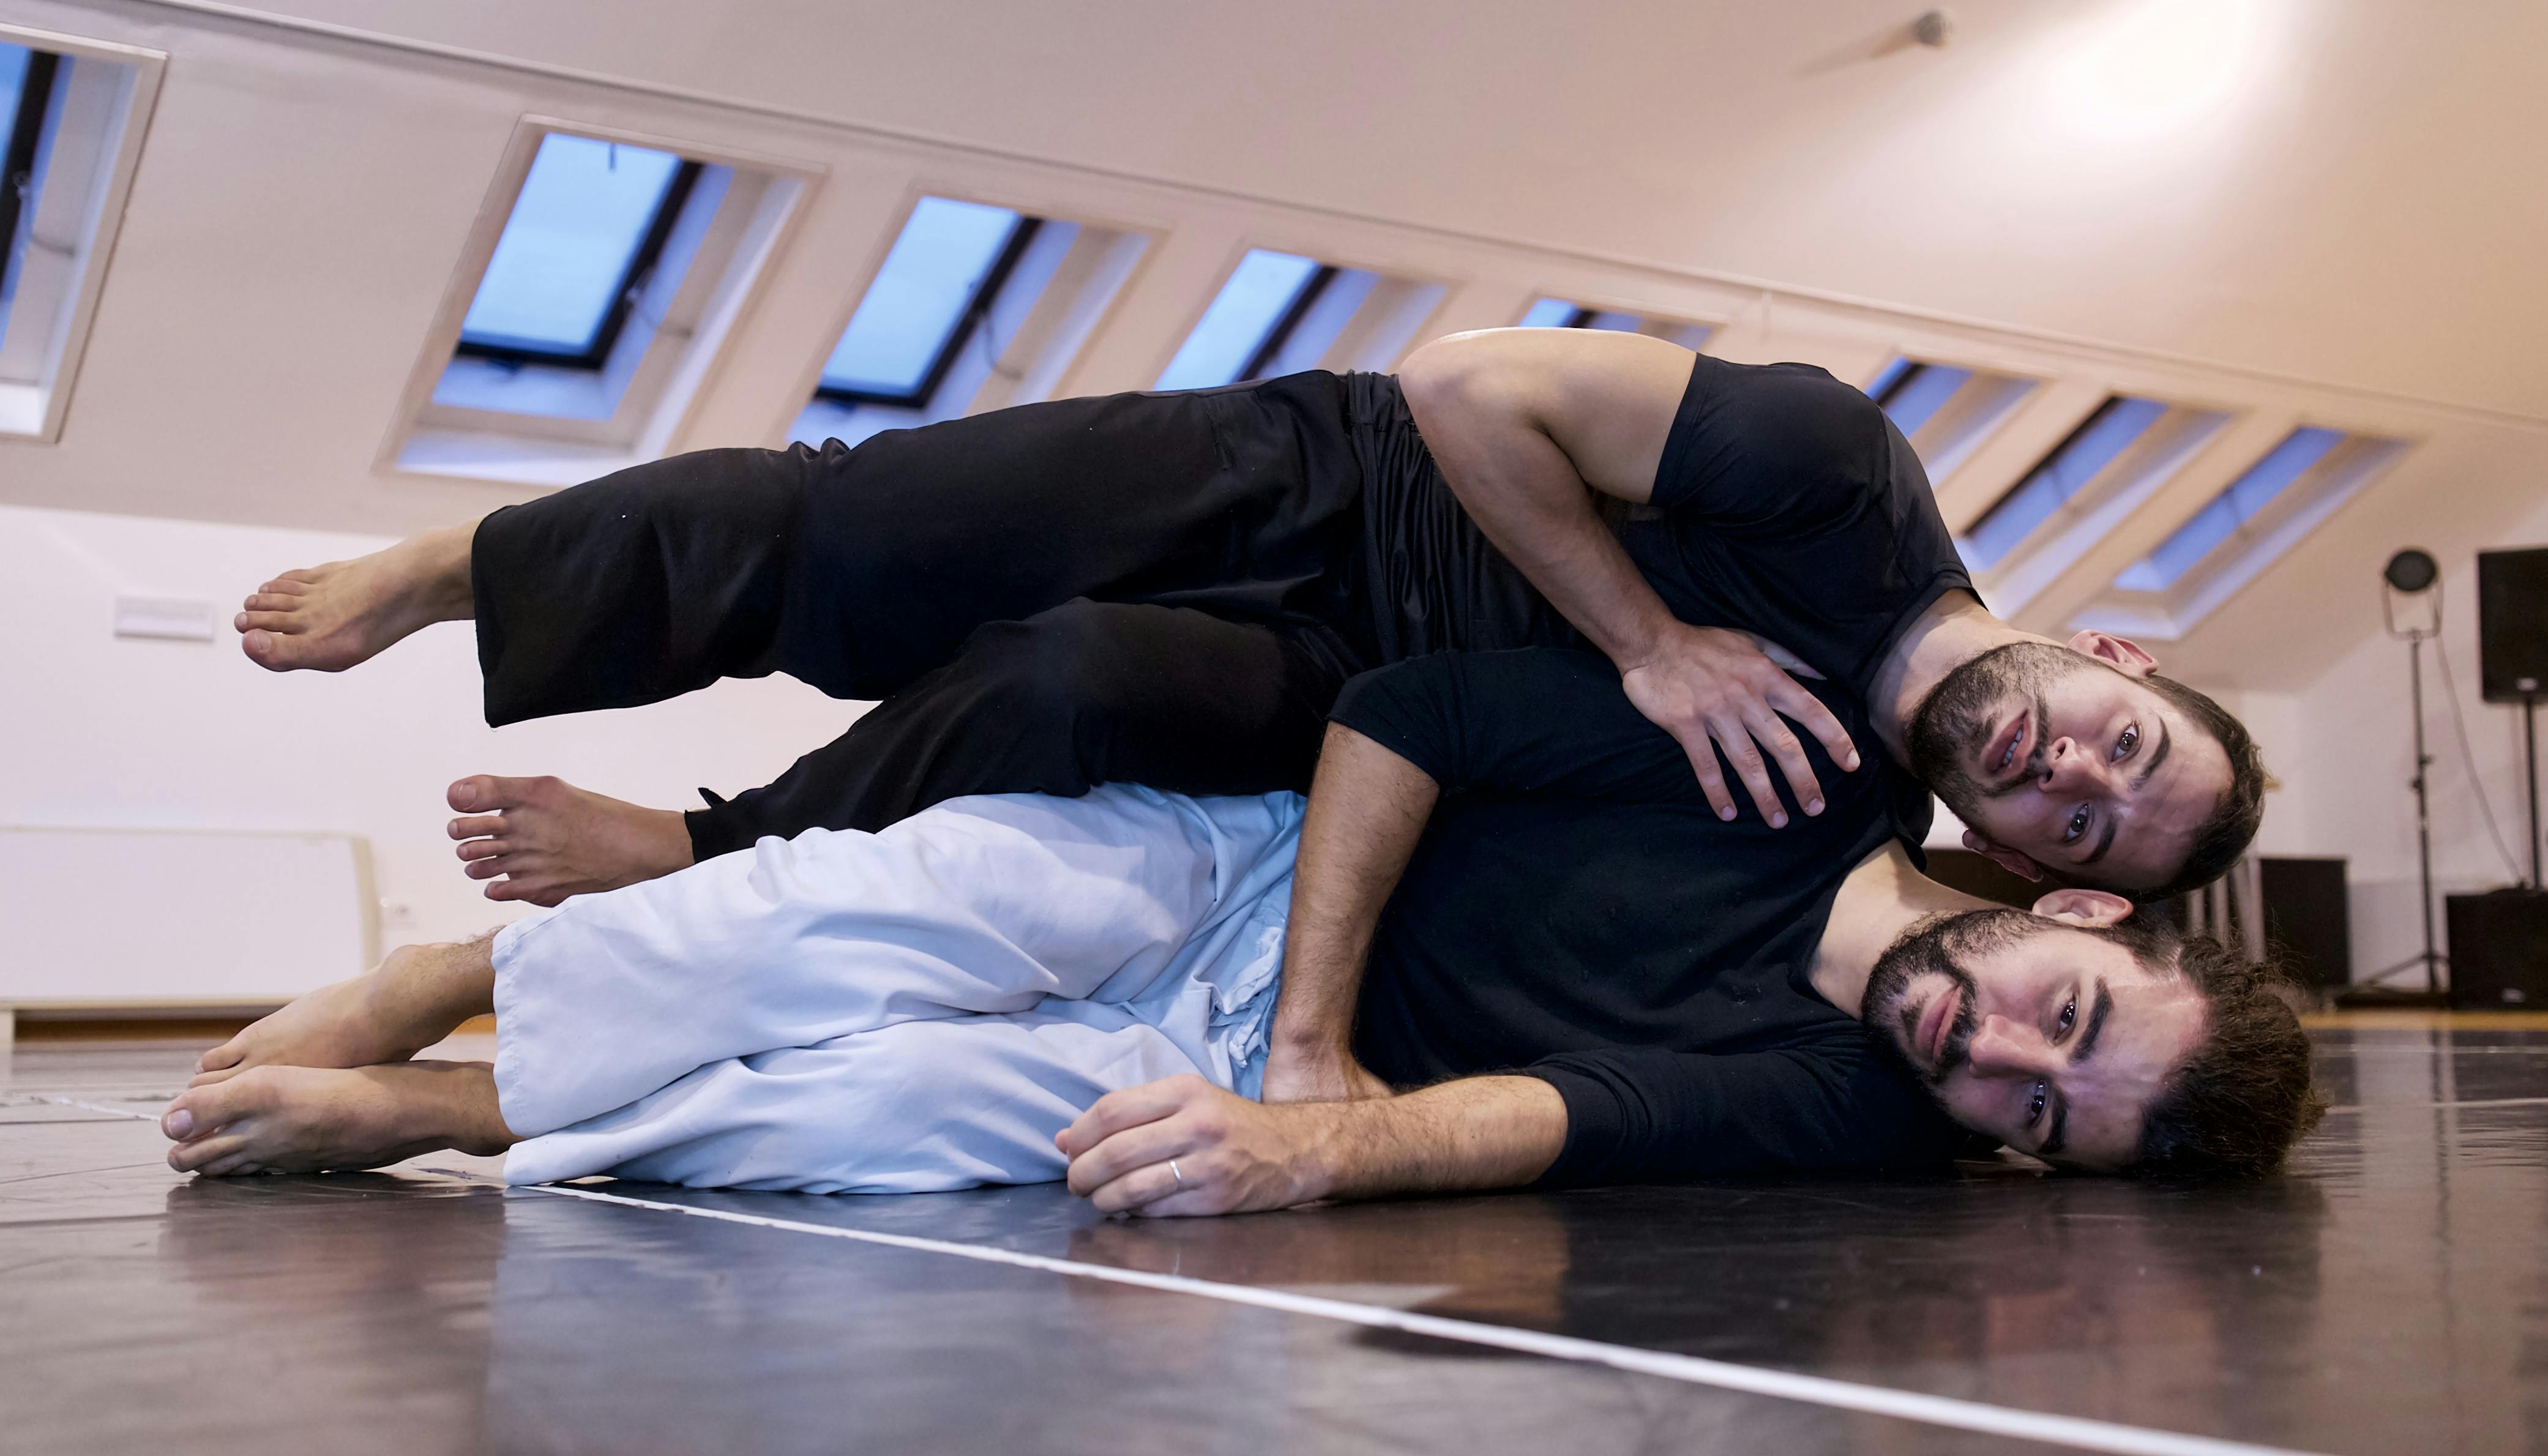 The two dancers are stretched out on the floor on one side, facing the camera, one suspended over the other's body.